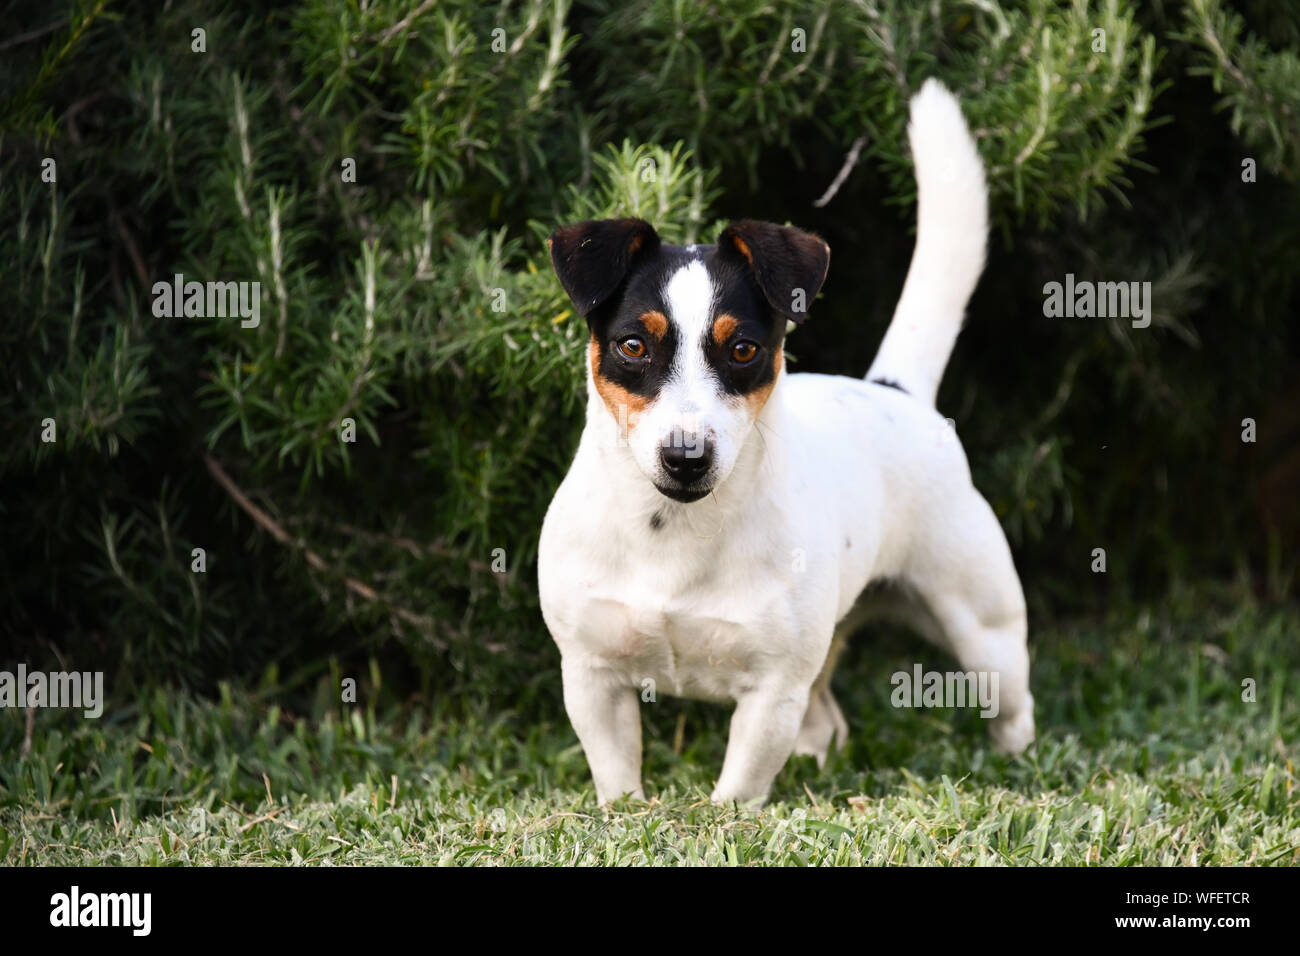 Jack Russell Short Hair and Short Leg White Black and Brown Dog Stock Photo